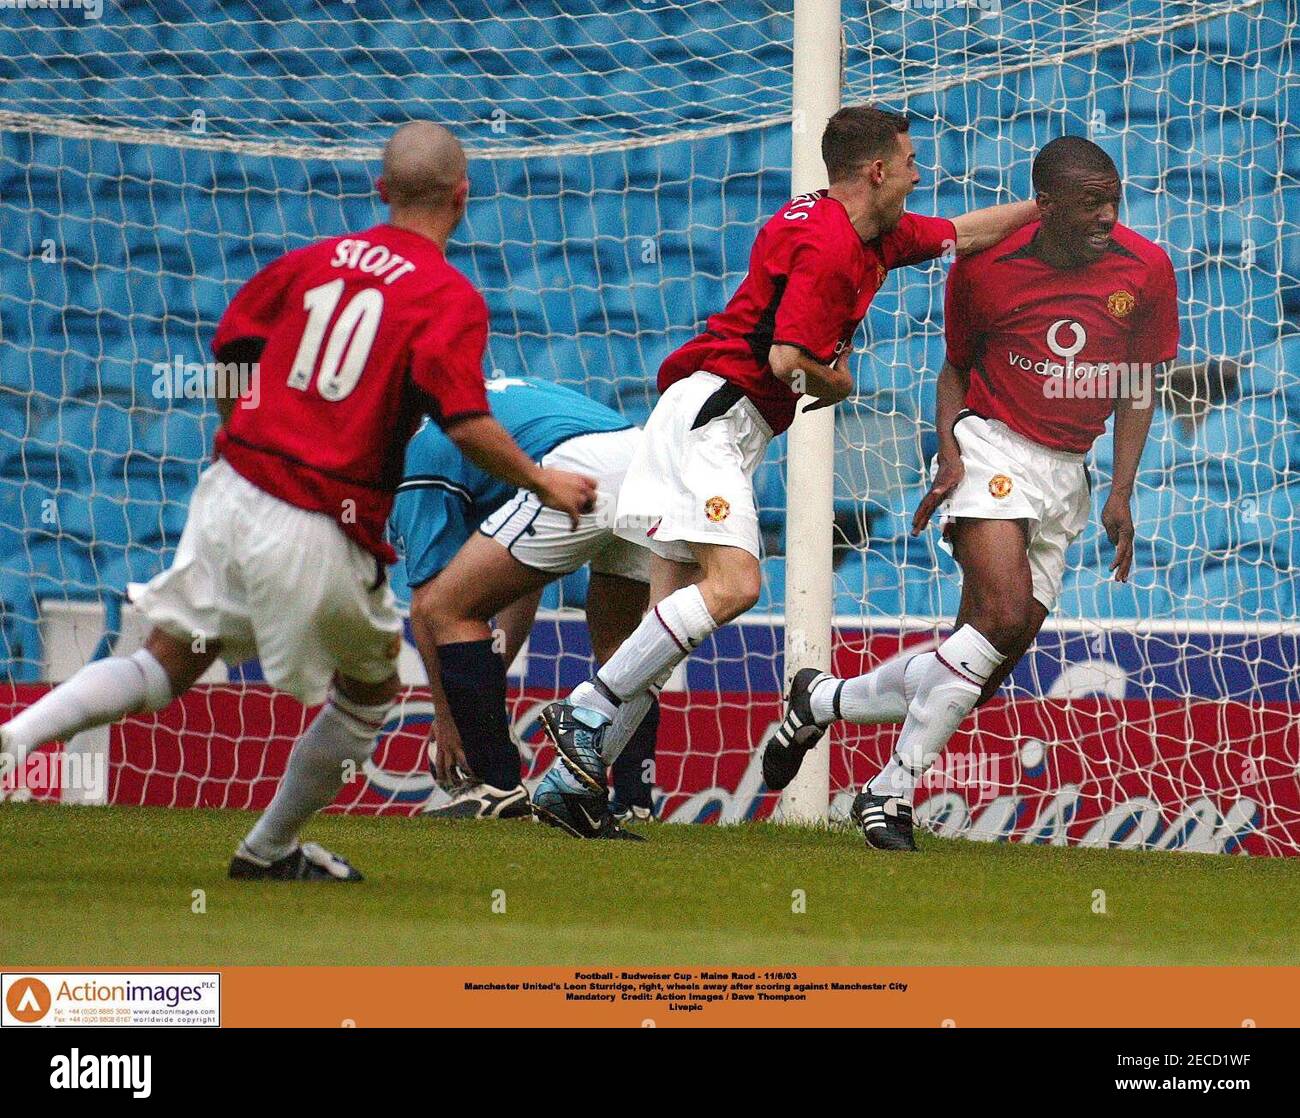 Football Budweiser Cup Maine Raod 11 6 03 Manchester United S Leon Sturridge Right Wheels Away After Scoring Against Manchester City Mandatory Credit Action Images Dave Thompson Livepic Stock Photo Alamy